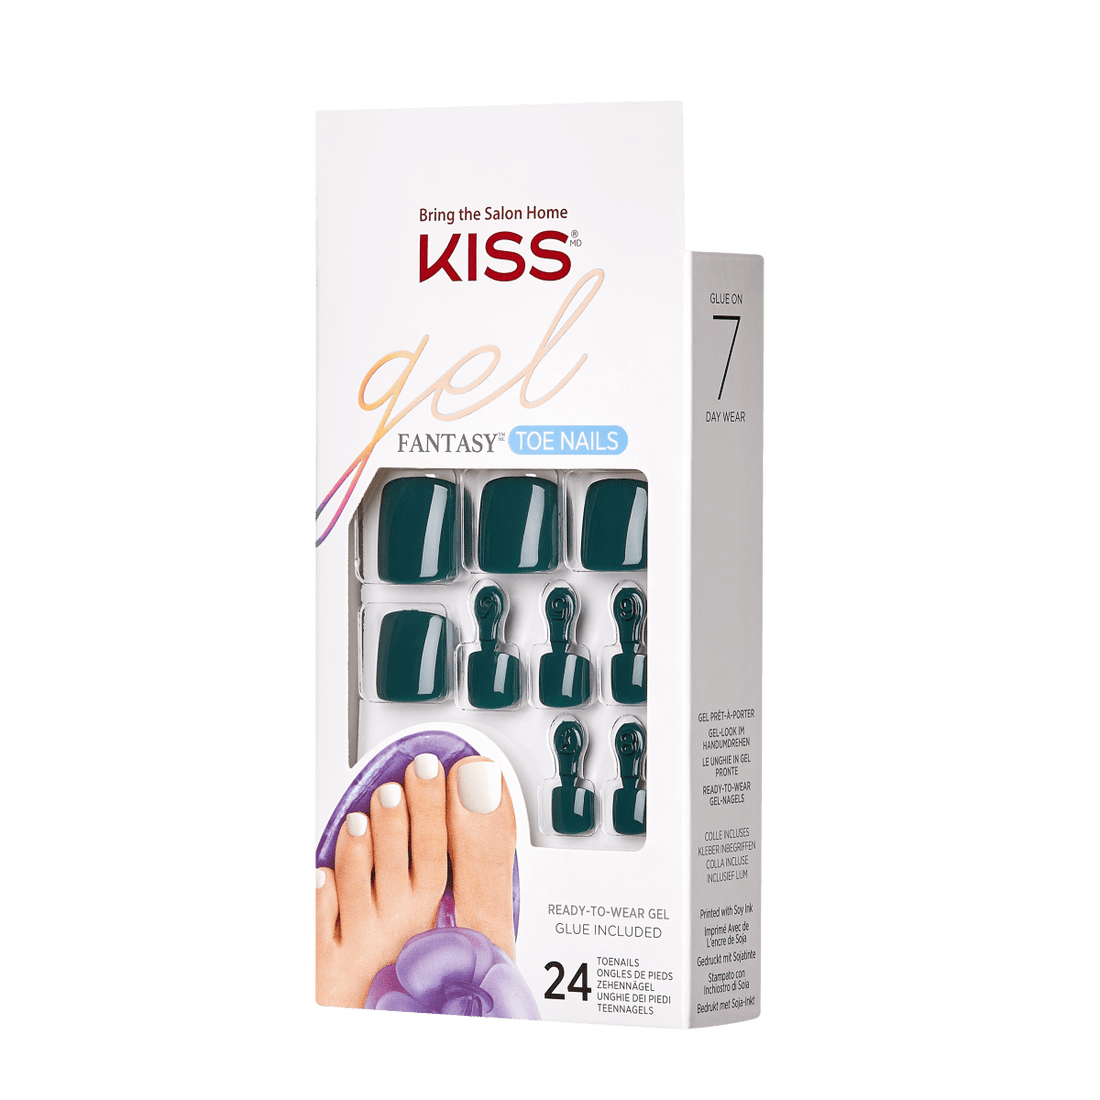 KISS Gel Fantasy, Press-On Nails, Forest, Green, Short Squoval, 24ct